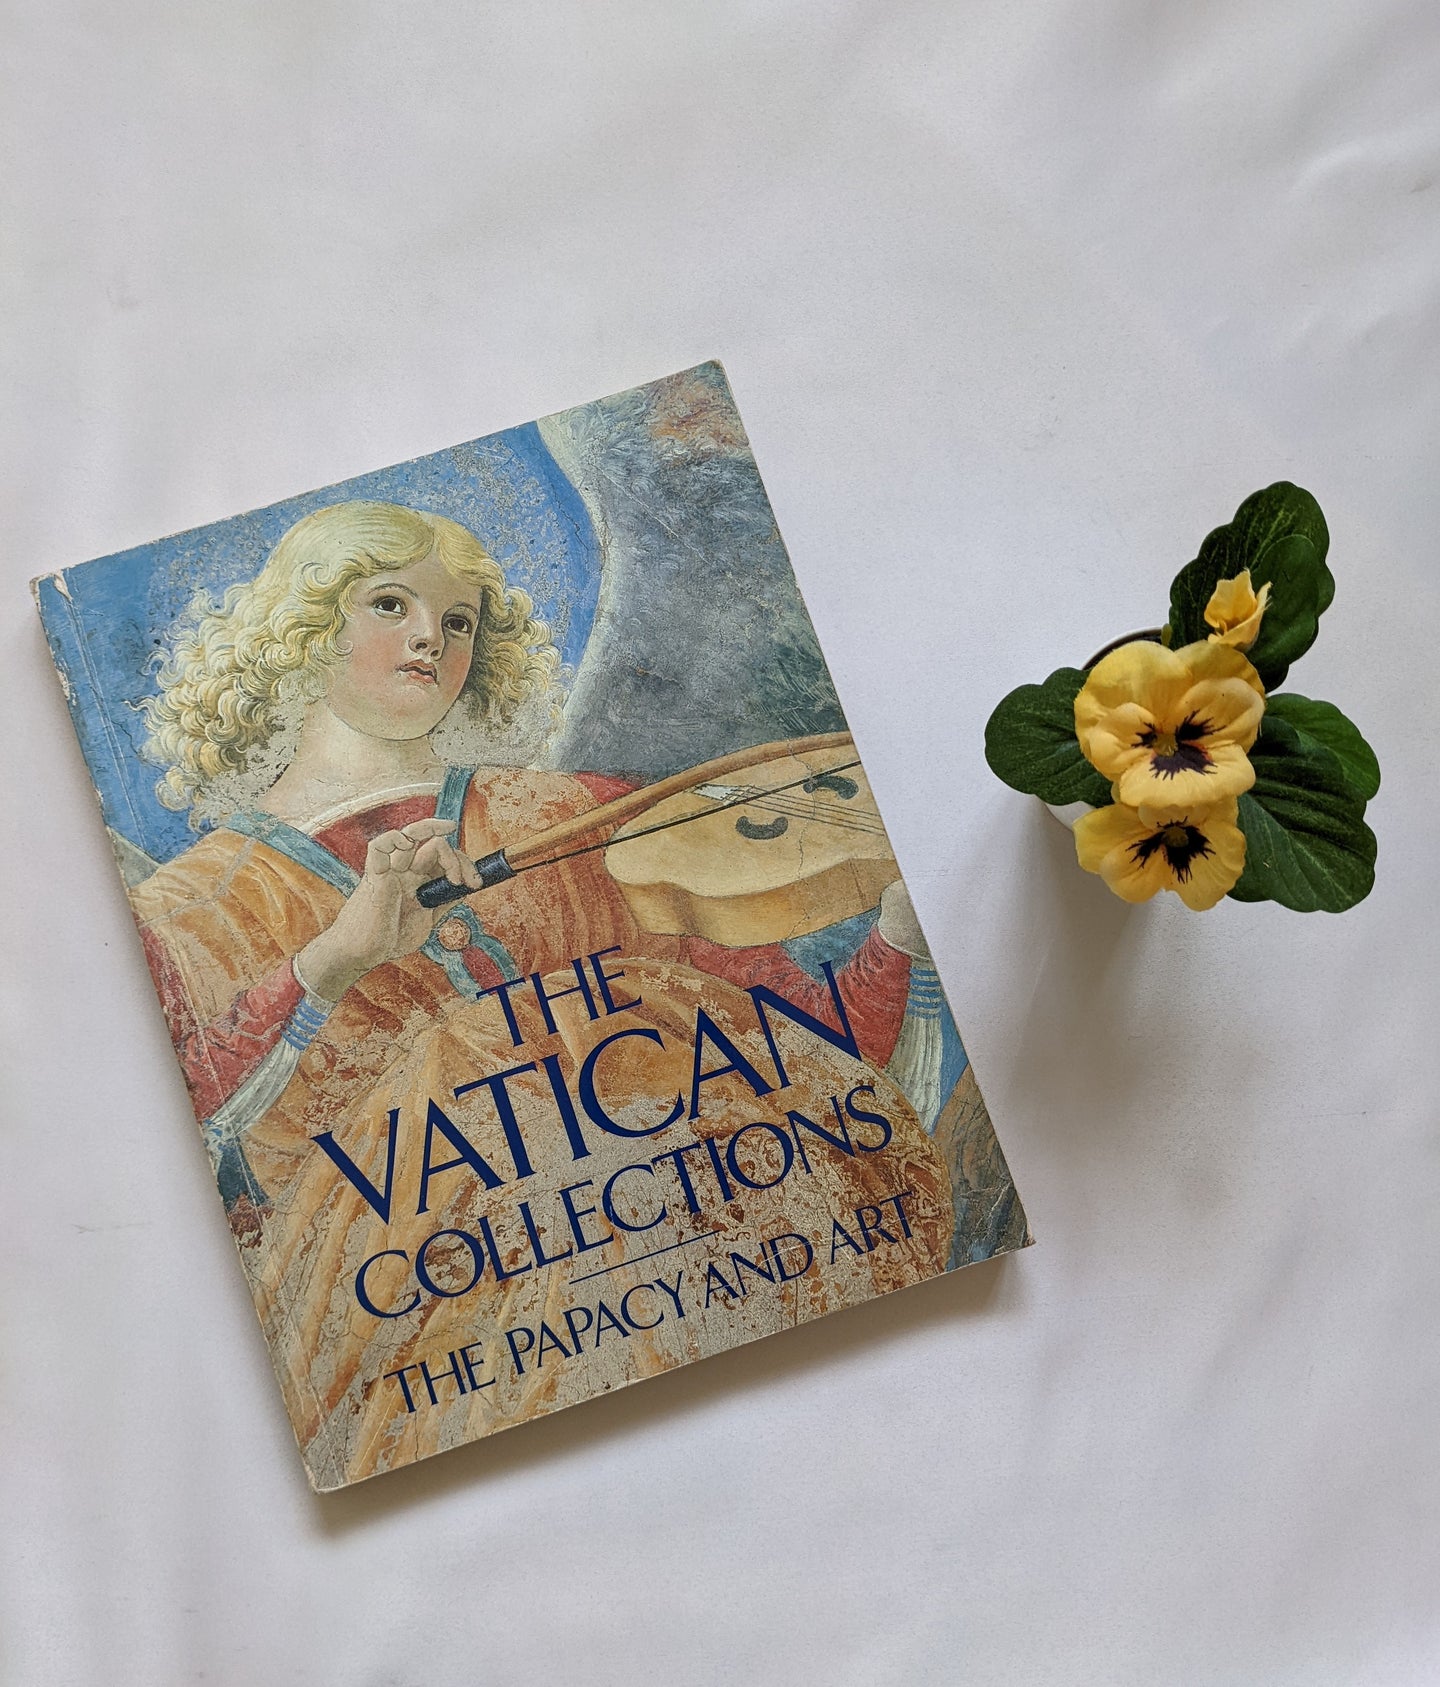 The Vatican Collections The Papacy And Art